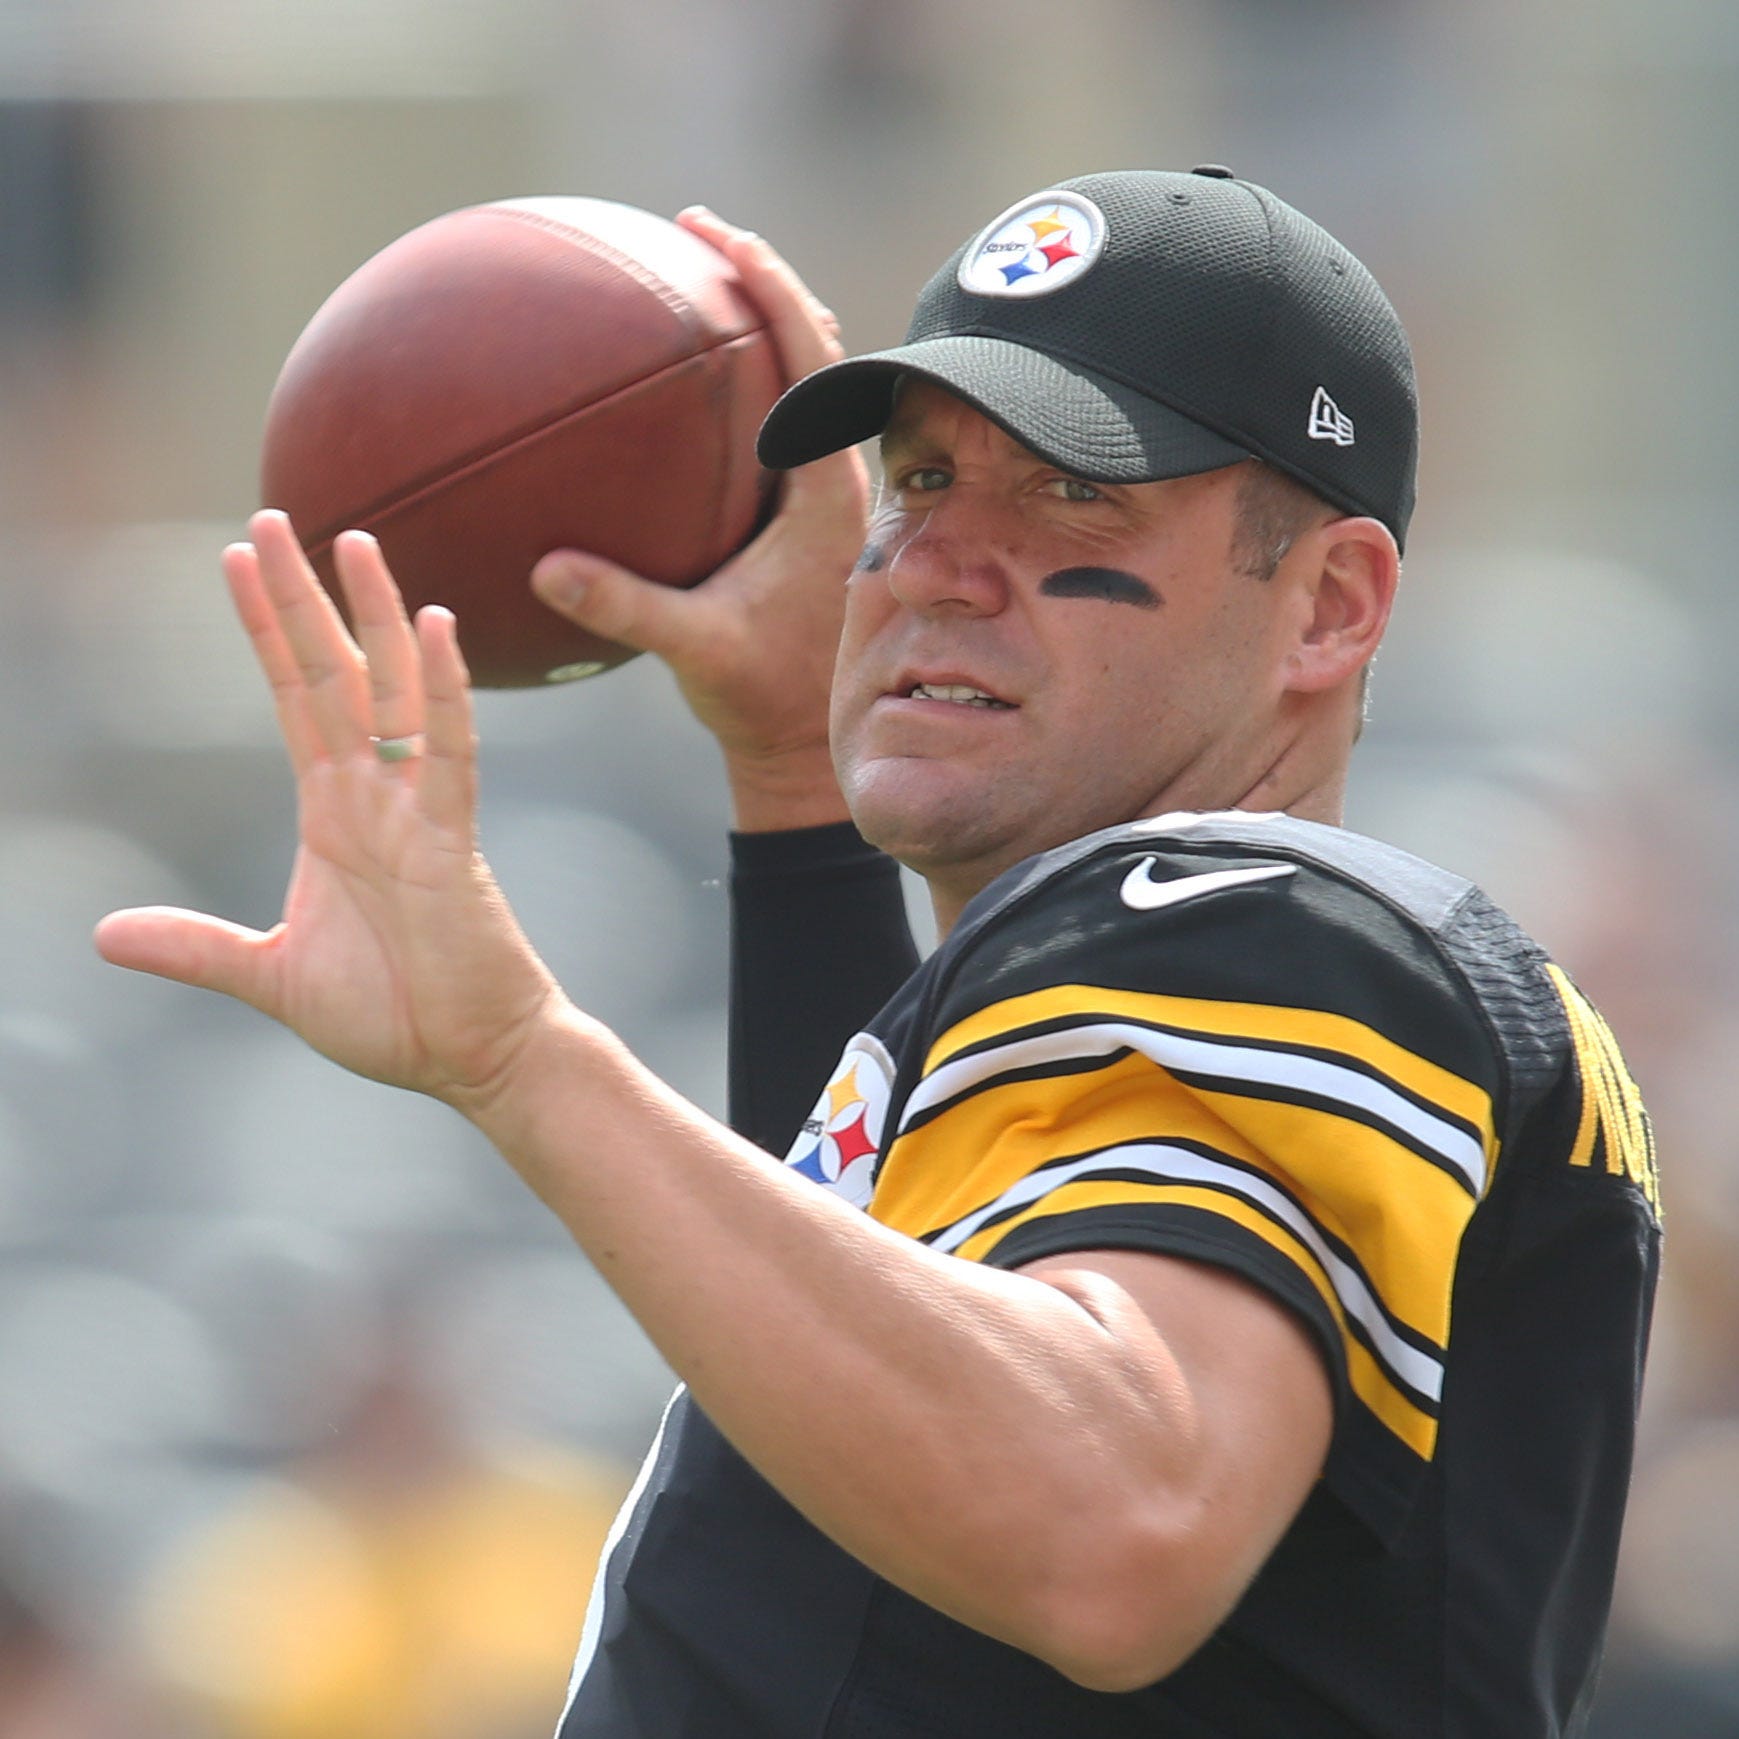 Ben Roethlisberger and the Steelers are winless (0-1-1) after two games.